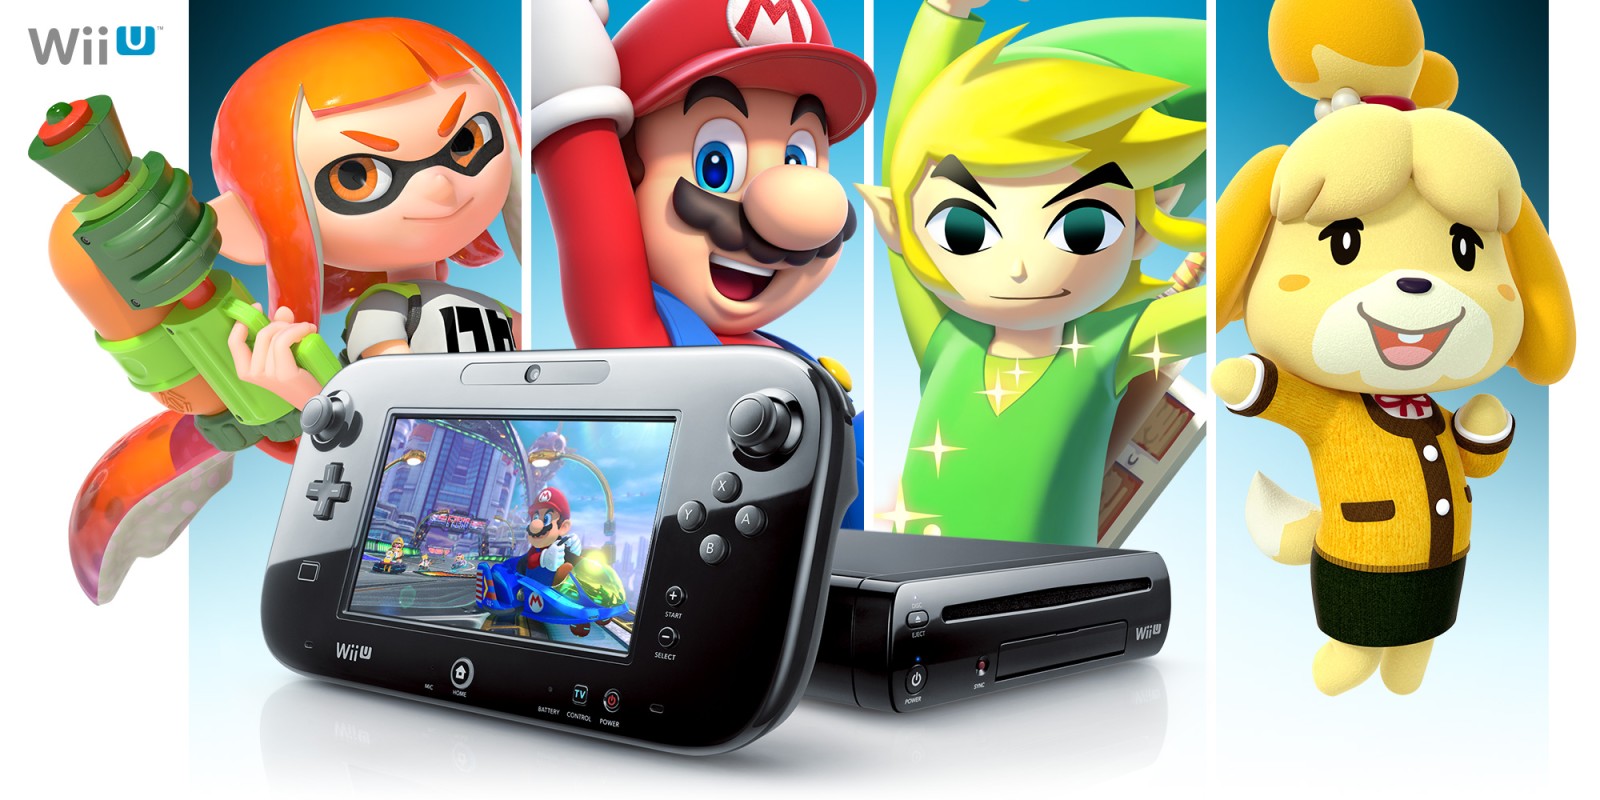 Right this moment is the day Nintendo formally kills off 3DS and Wii U On the web options